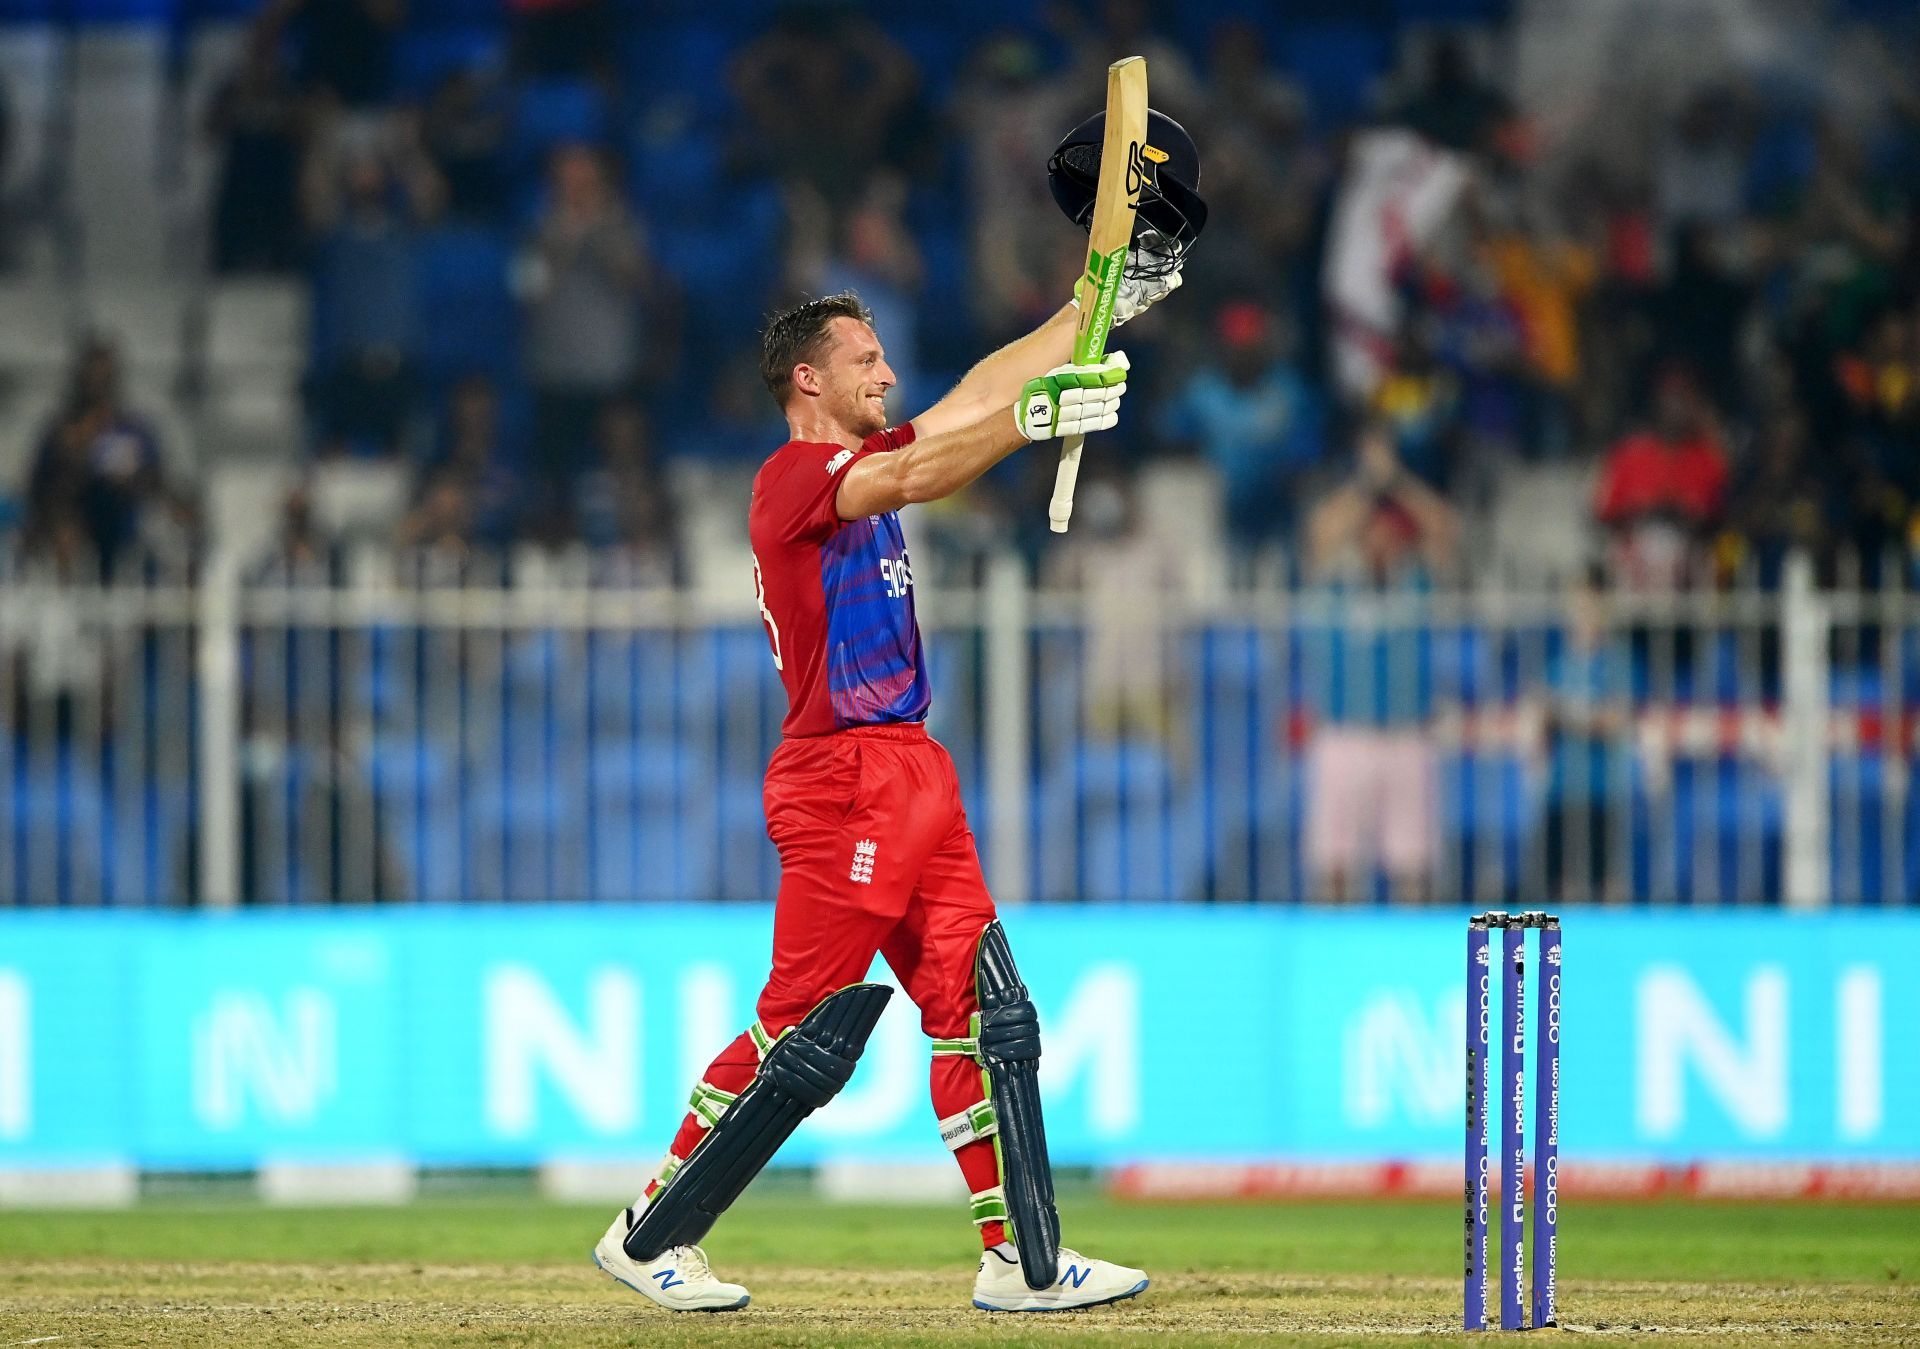 Jos Buttler scored an unbeaten 101 off 67 deliveries to rescue England from 35-3